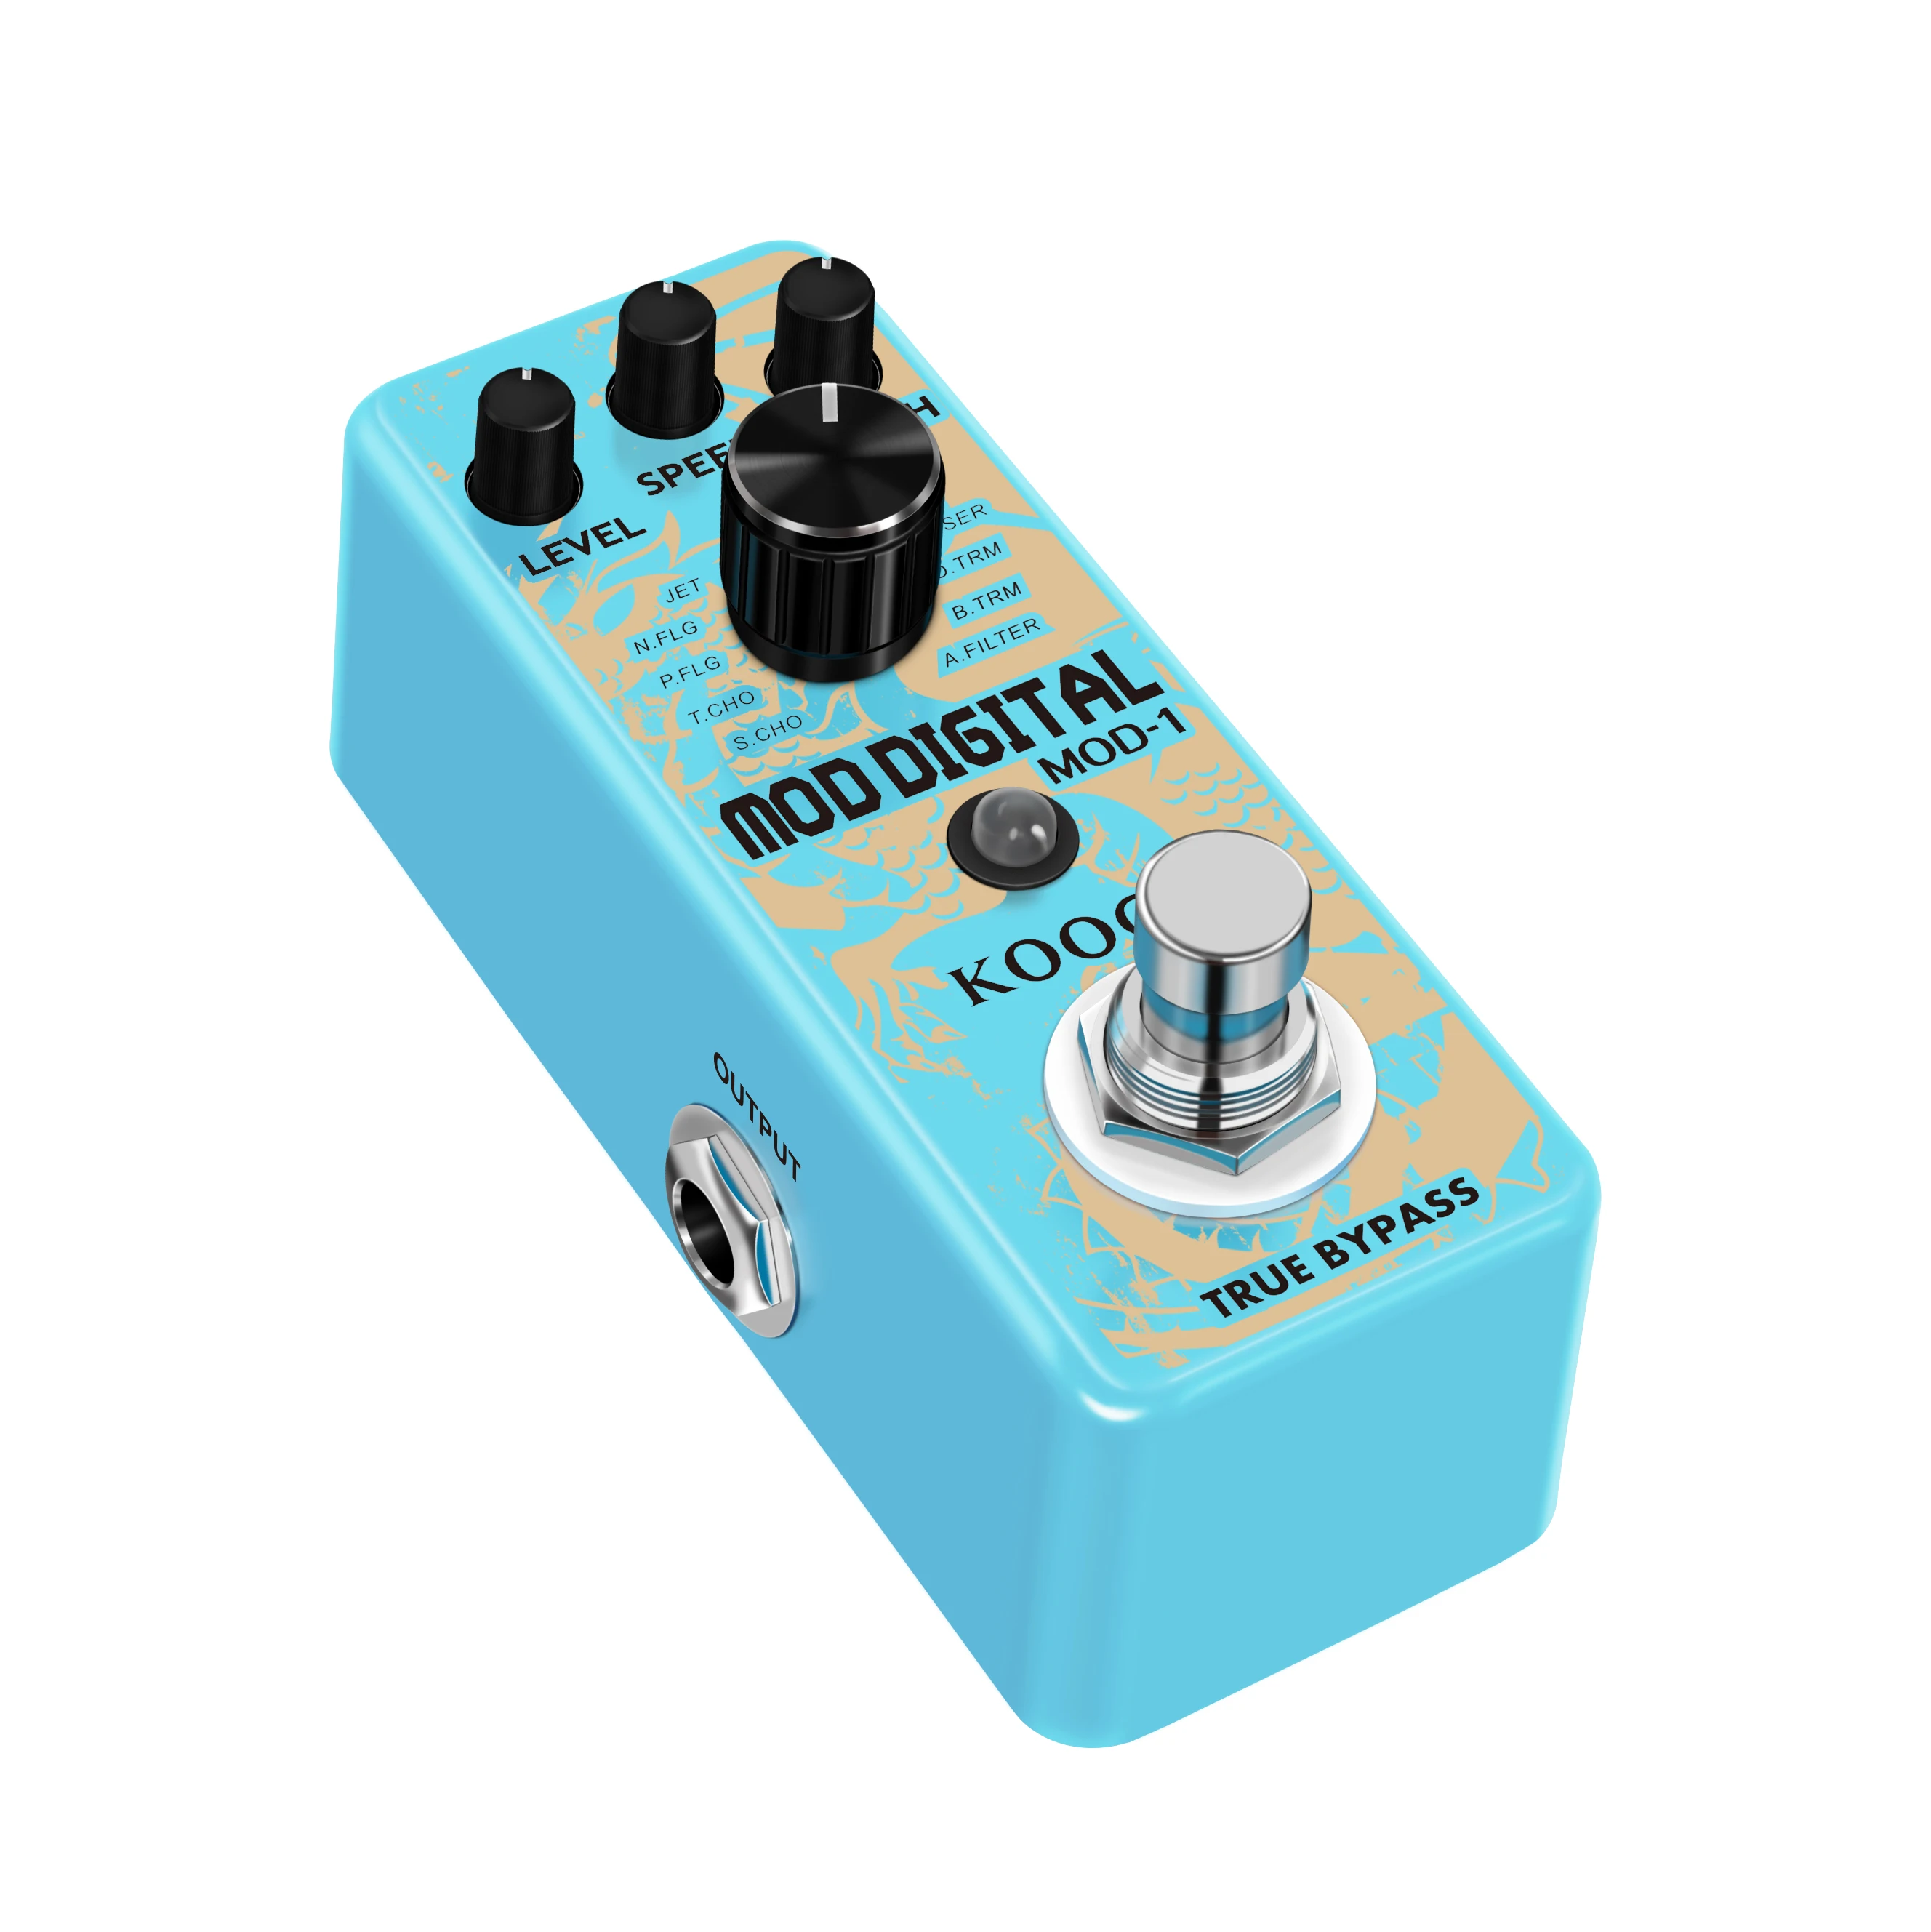 Koogo Guitar Pedal Mod Station 11 Kinds Of Classic Modulation Effect Storage Of Timbre Sound Pedals True Bypass LEF-3808 enlarge